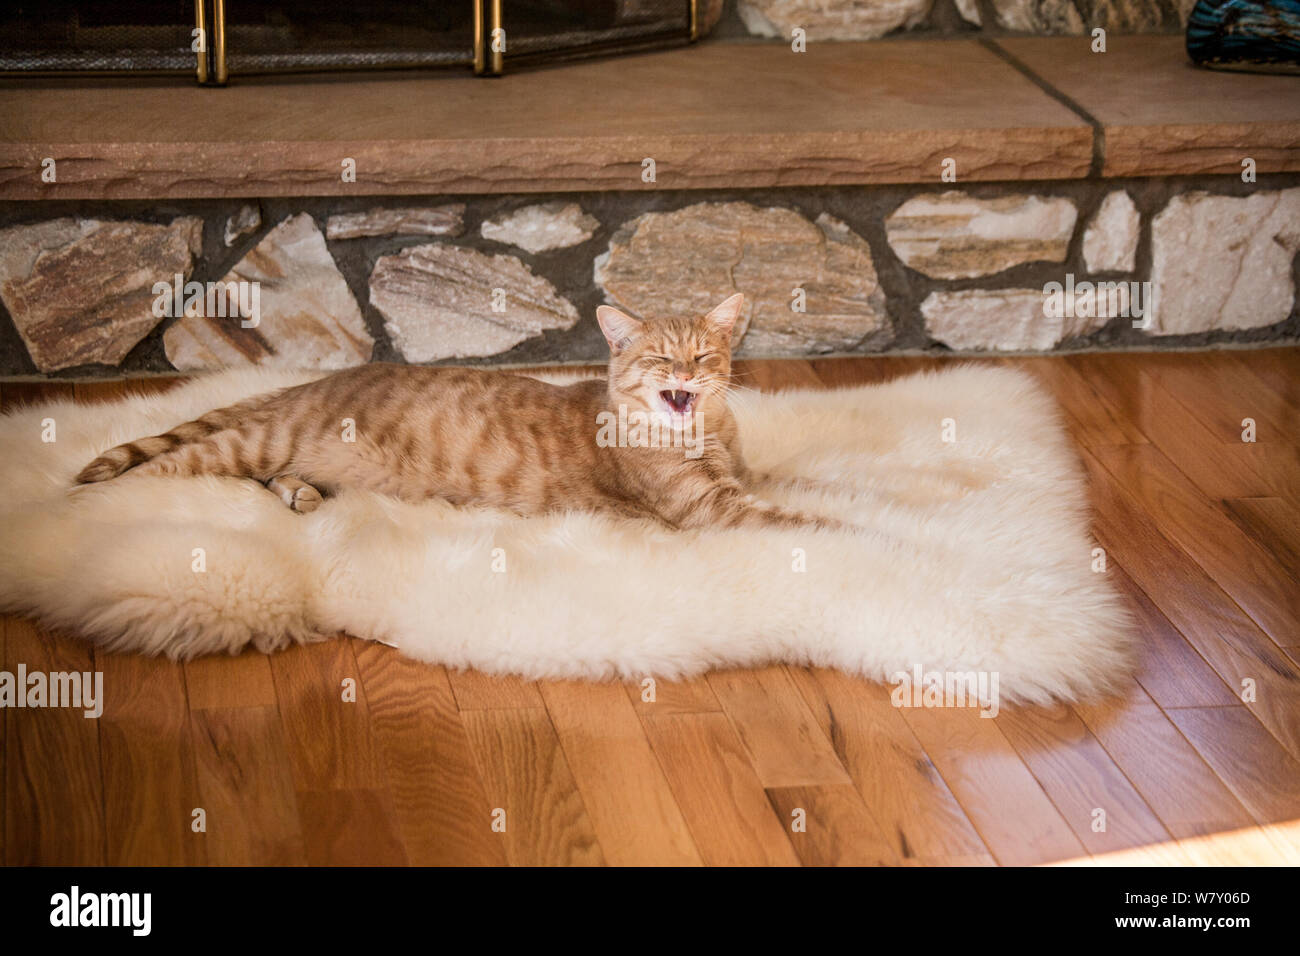 Orange yawning domestic tabby cat on a sheep skin rug in front of a fireplace, New Jersey, USA, funny domestic cats funny animals Stock Photo